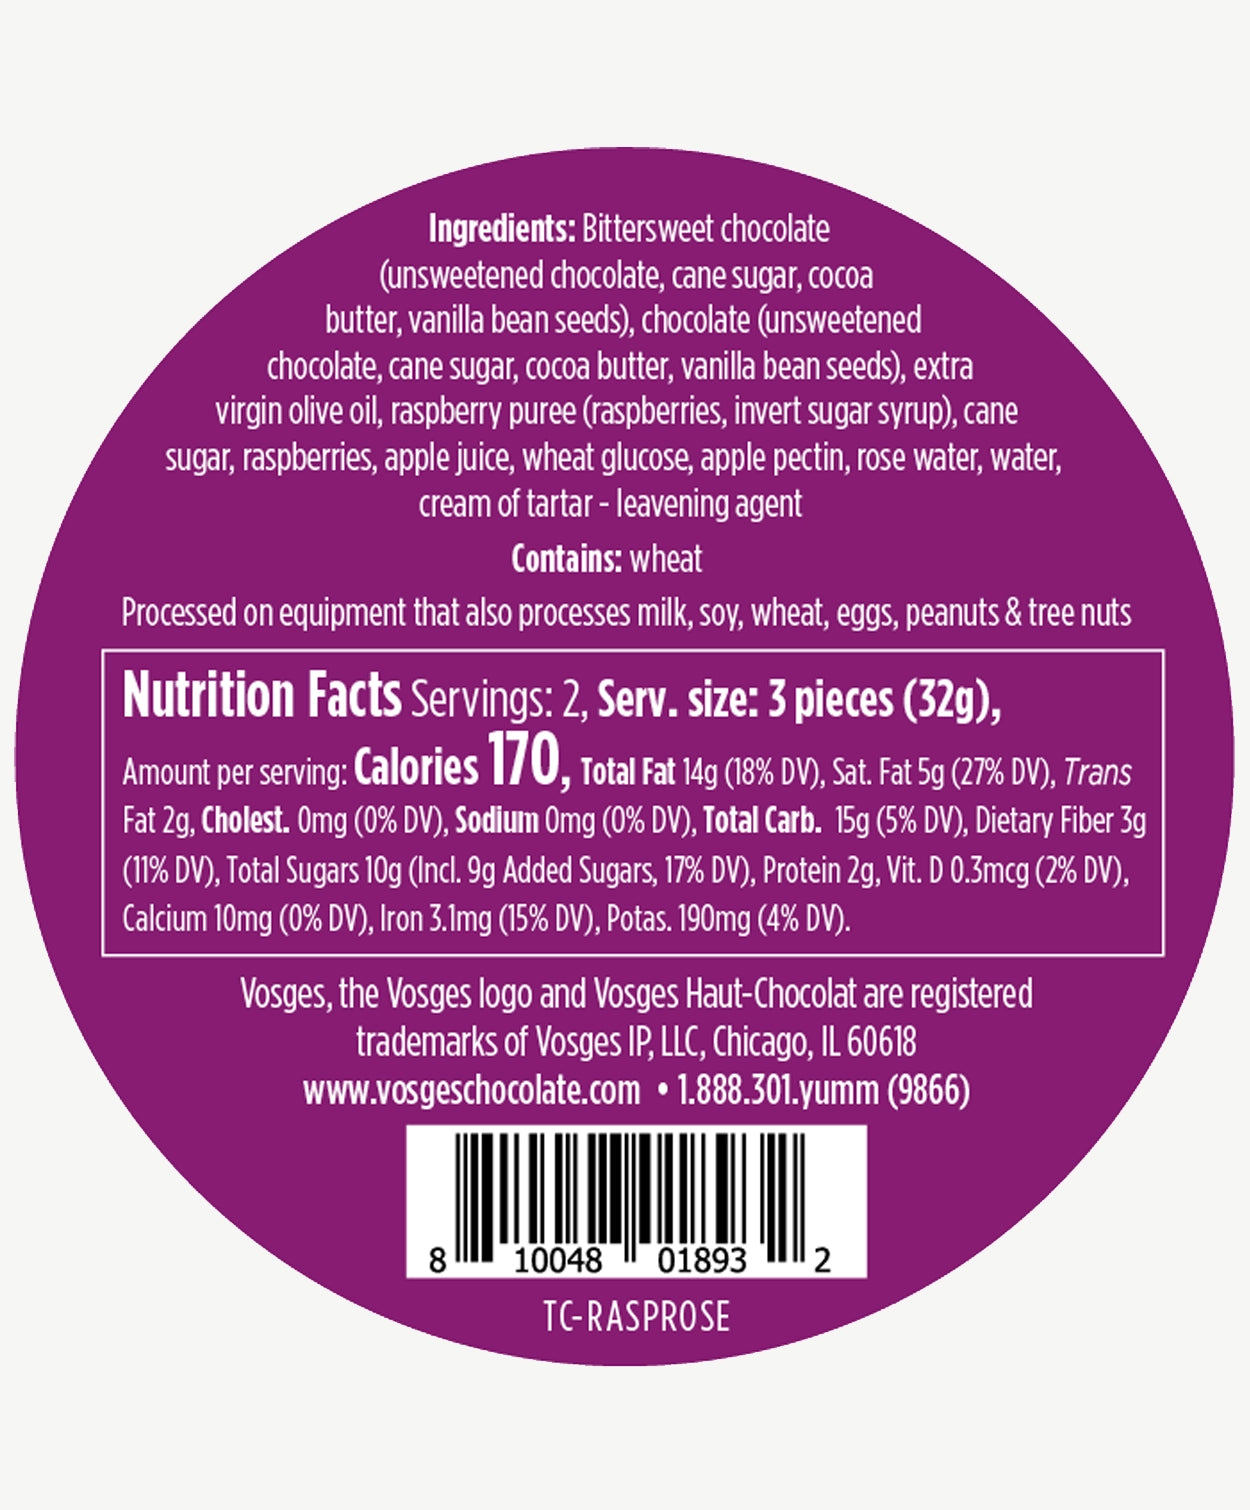 Ingredients and Nutrition facts for Vosges Raspberry Truffles, in white san serif font on a bright pink circular background.